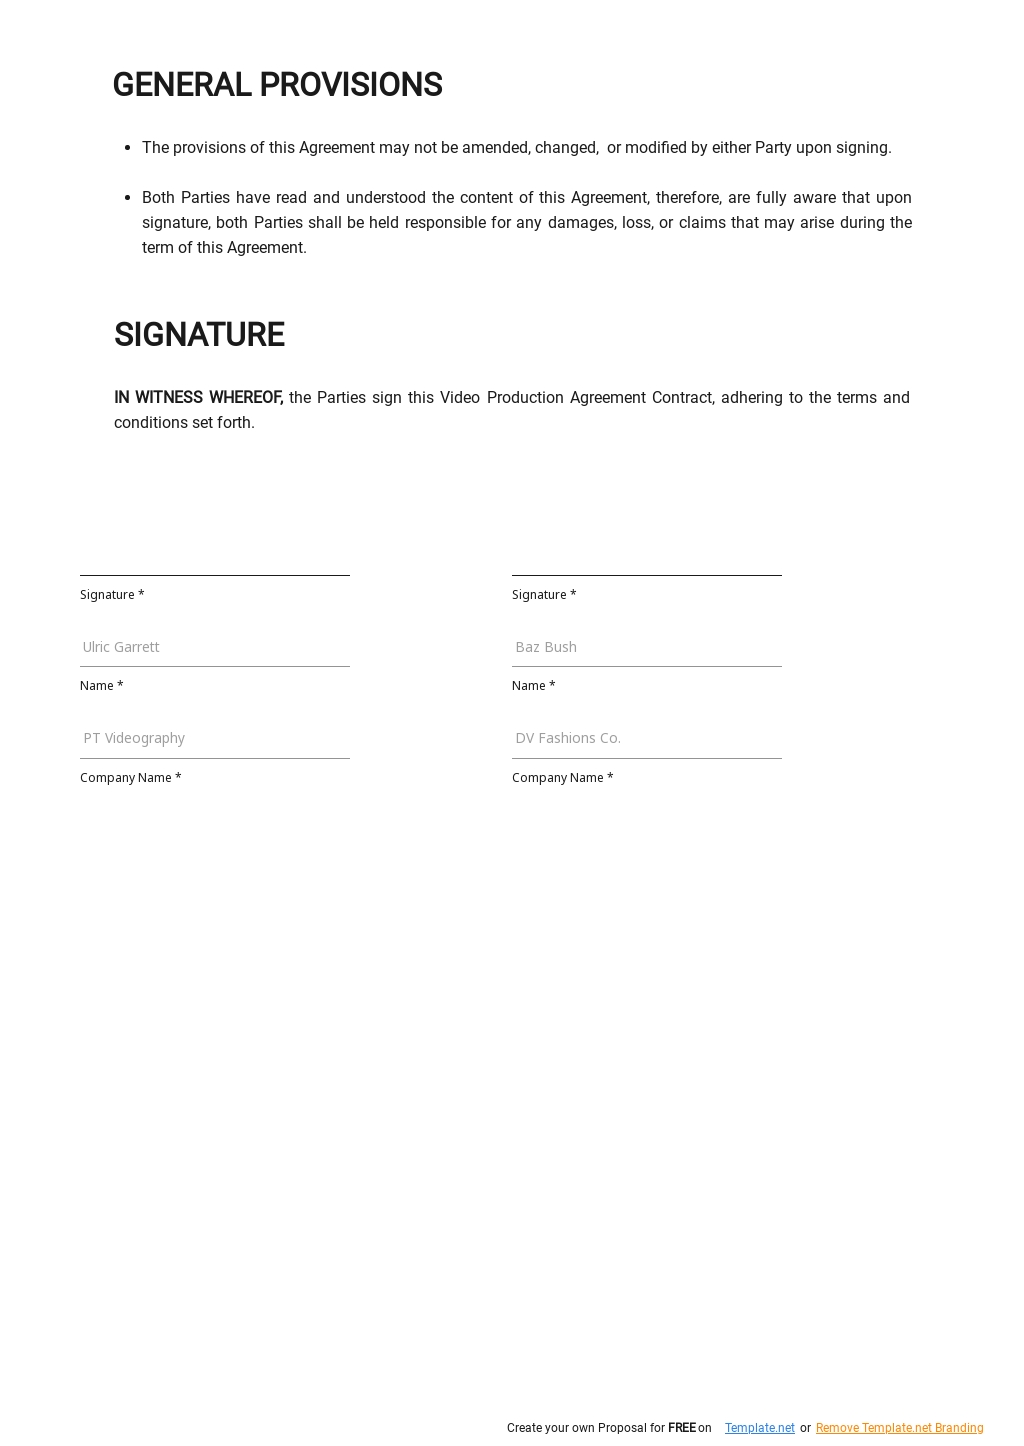 Free Video Production Agreement Contract Template 2.jpe